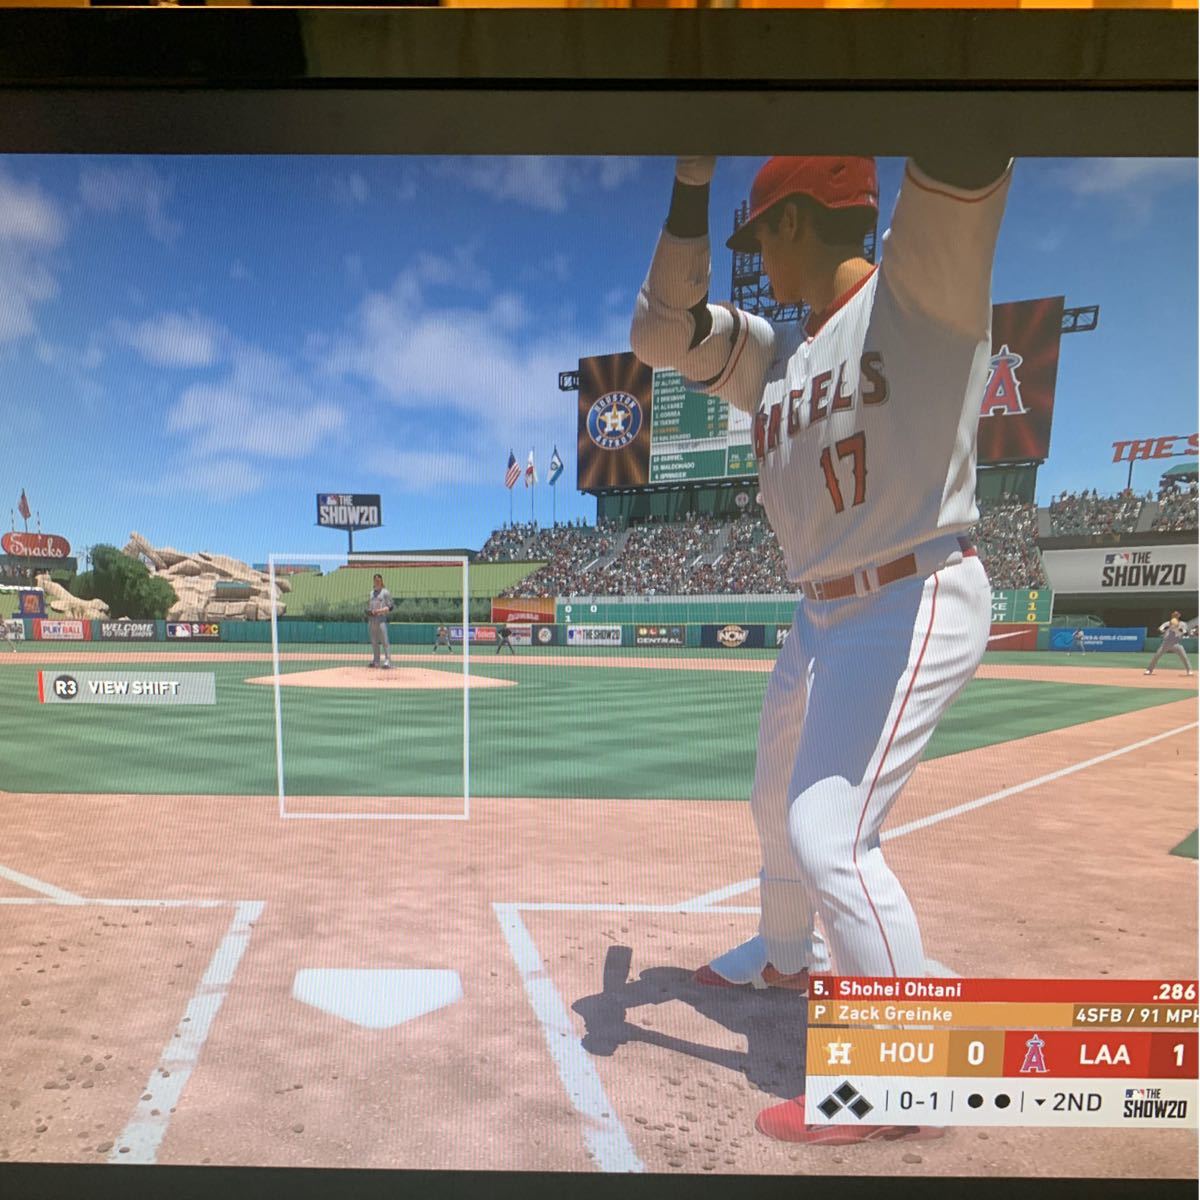 MLB The Show 20 PS4 ソフト★新品未開封